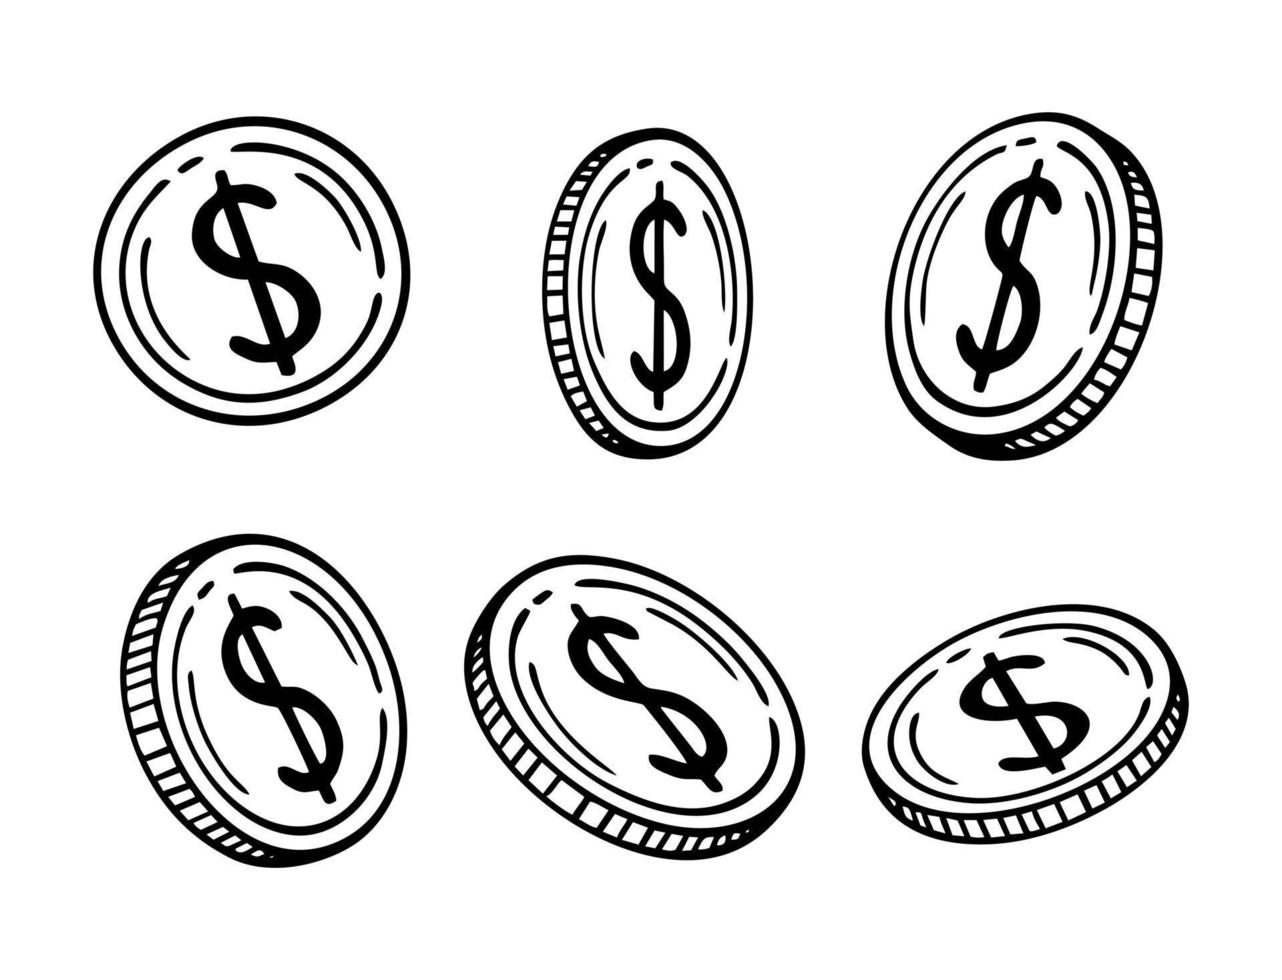 The American dollar. American currency on a white background. Vector illustration of a doodle.